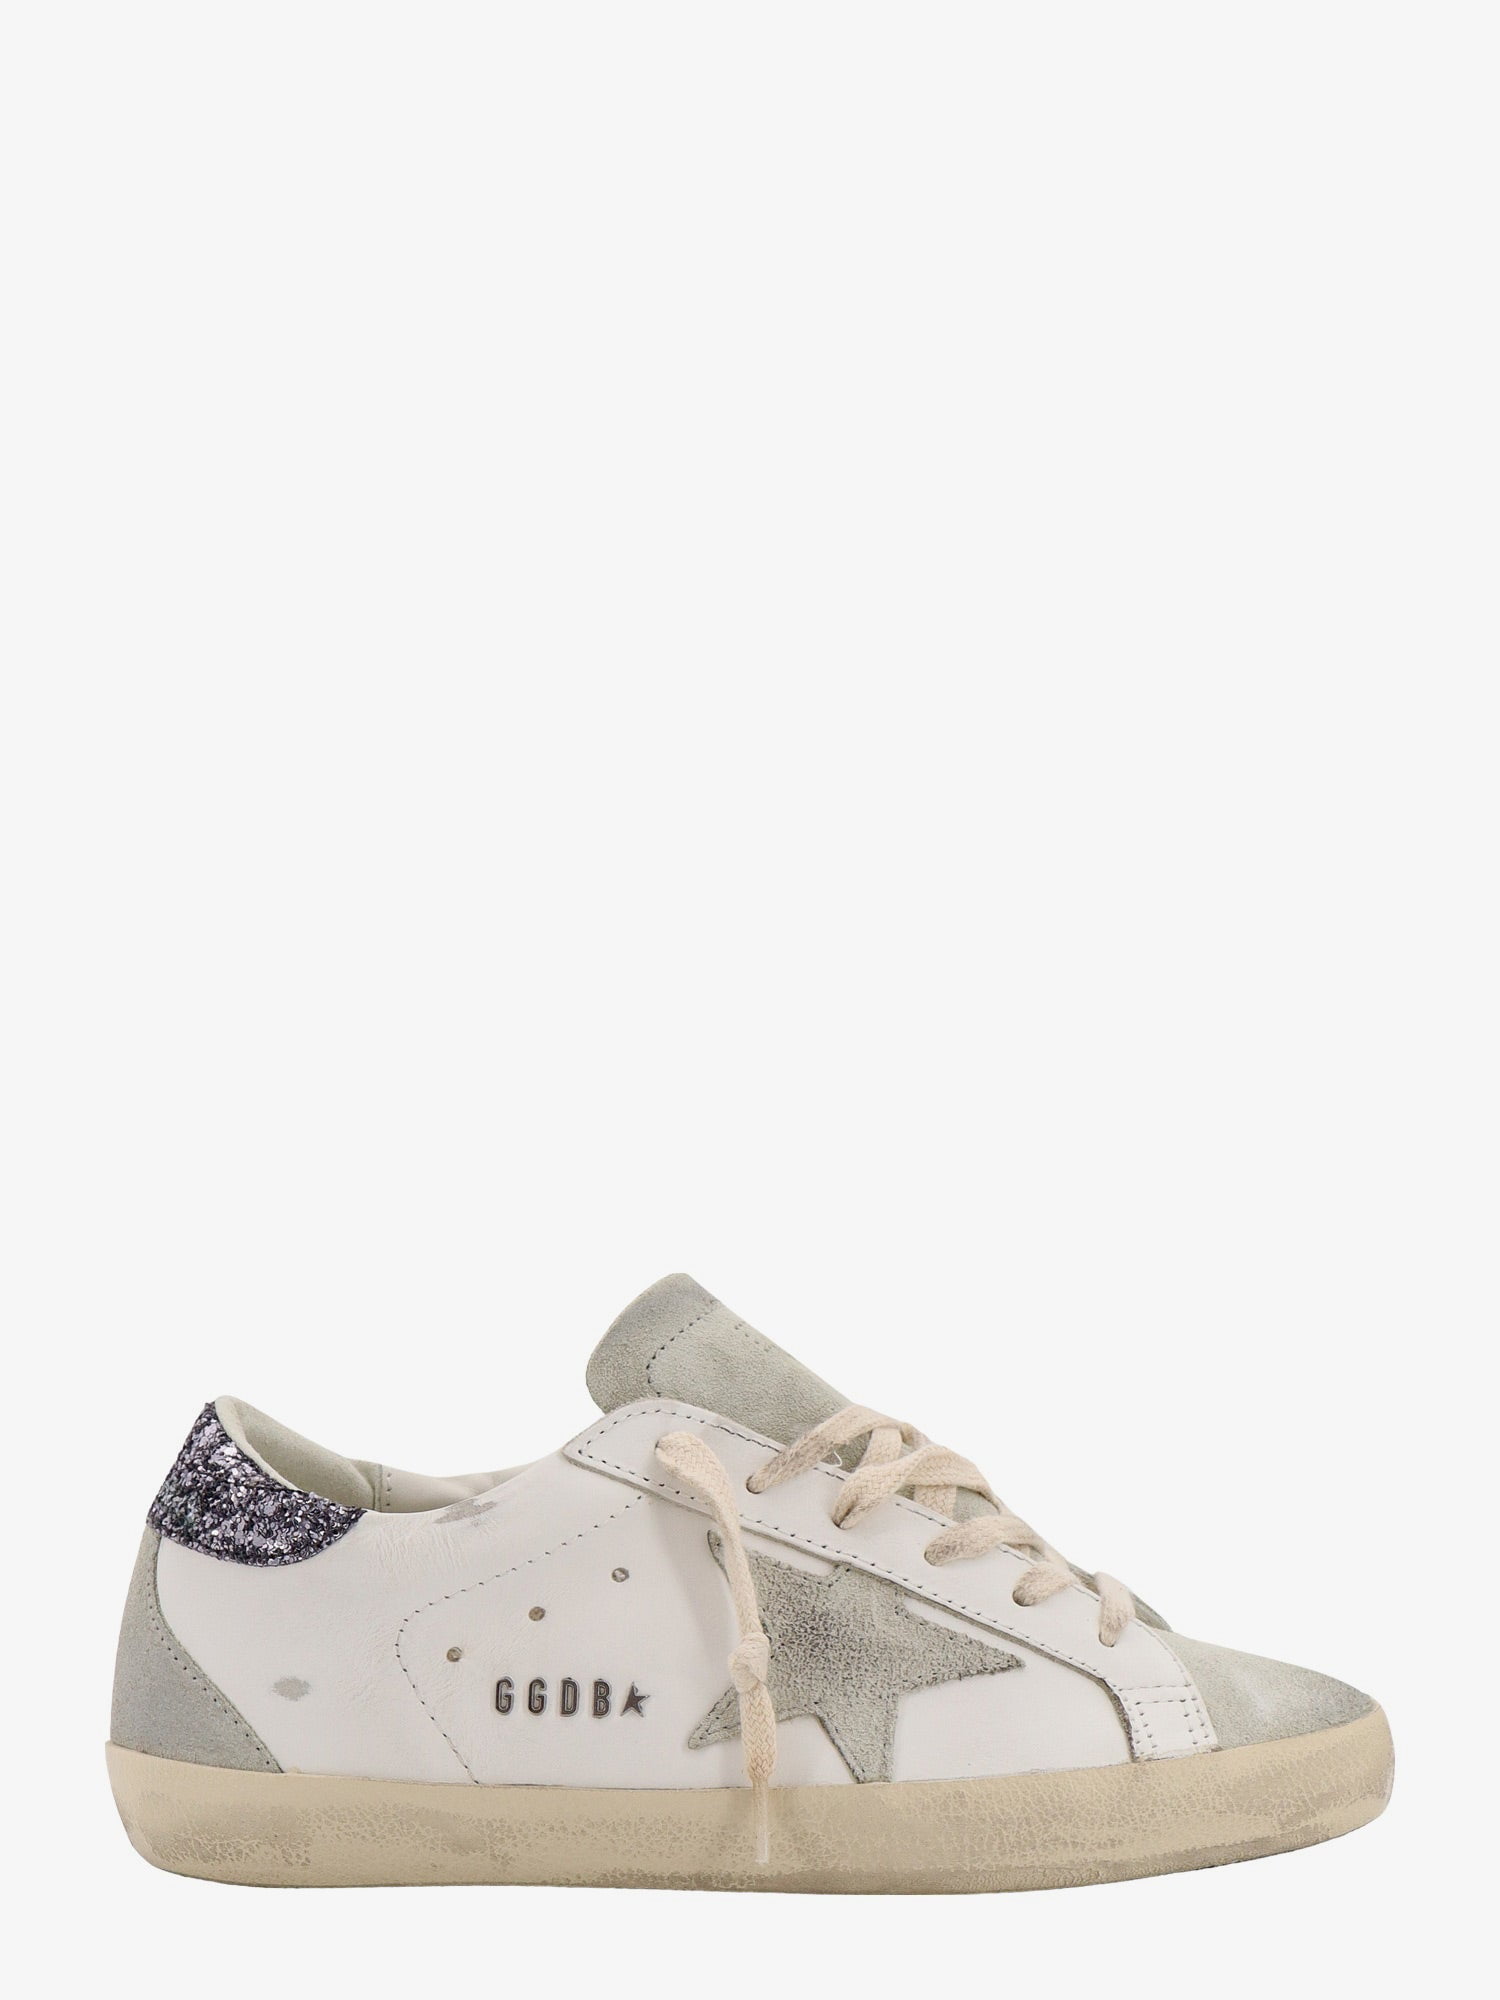 Golden Goose Deluxe Brand Woman Super-Star Woman White Sneakers ...